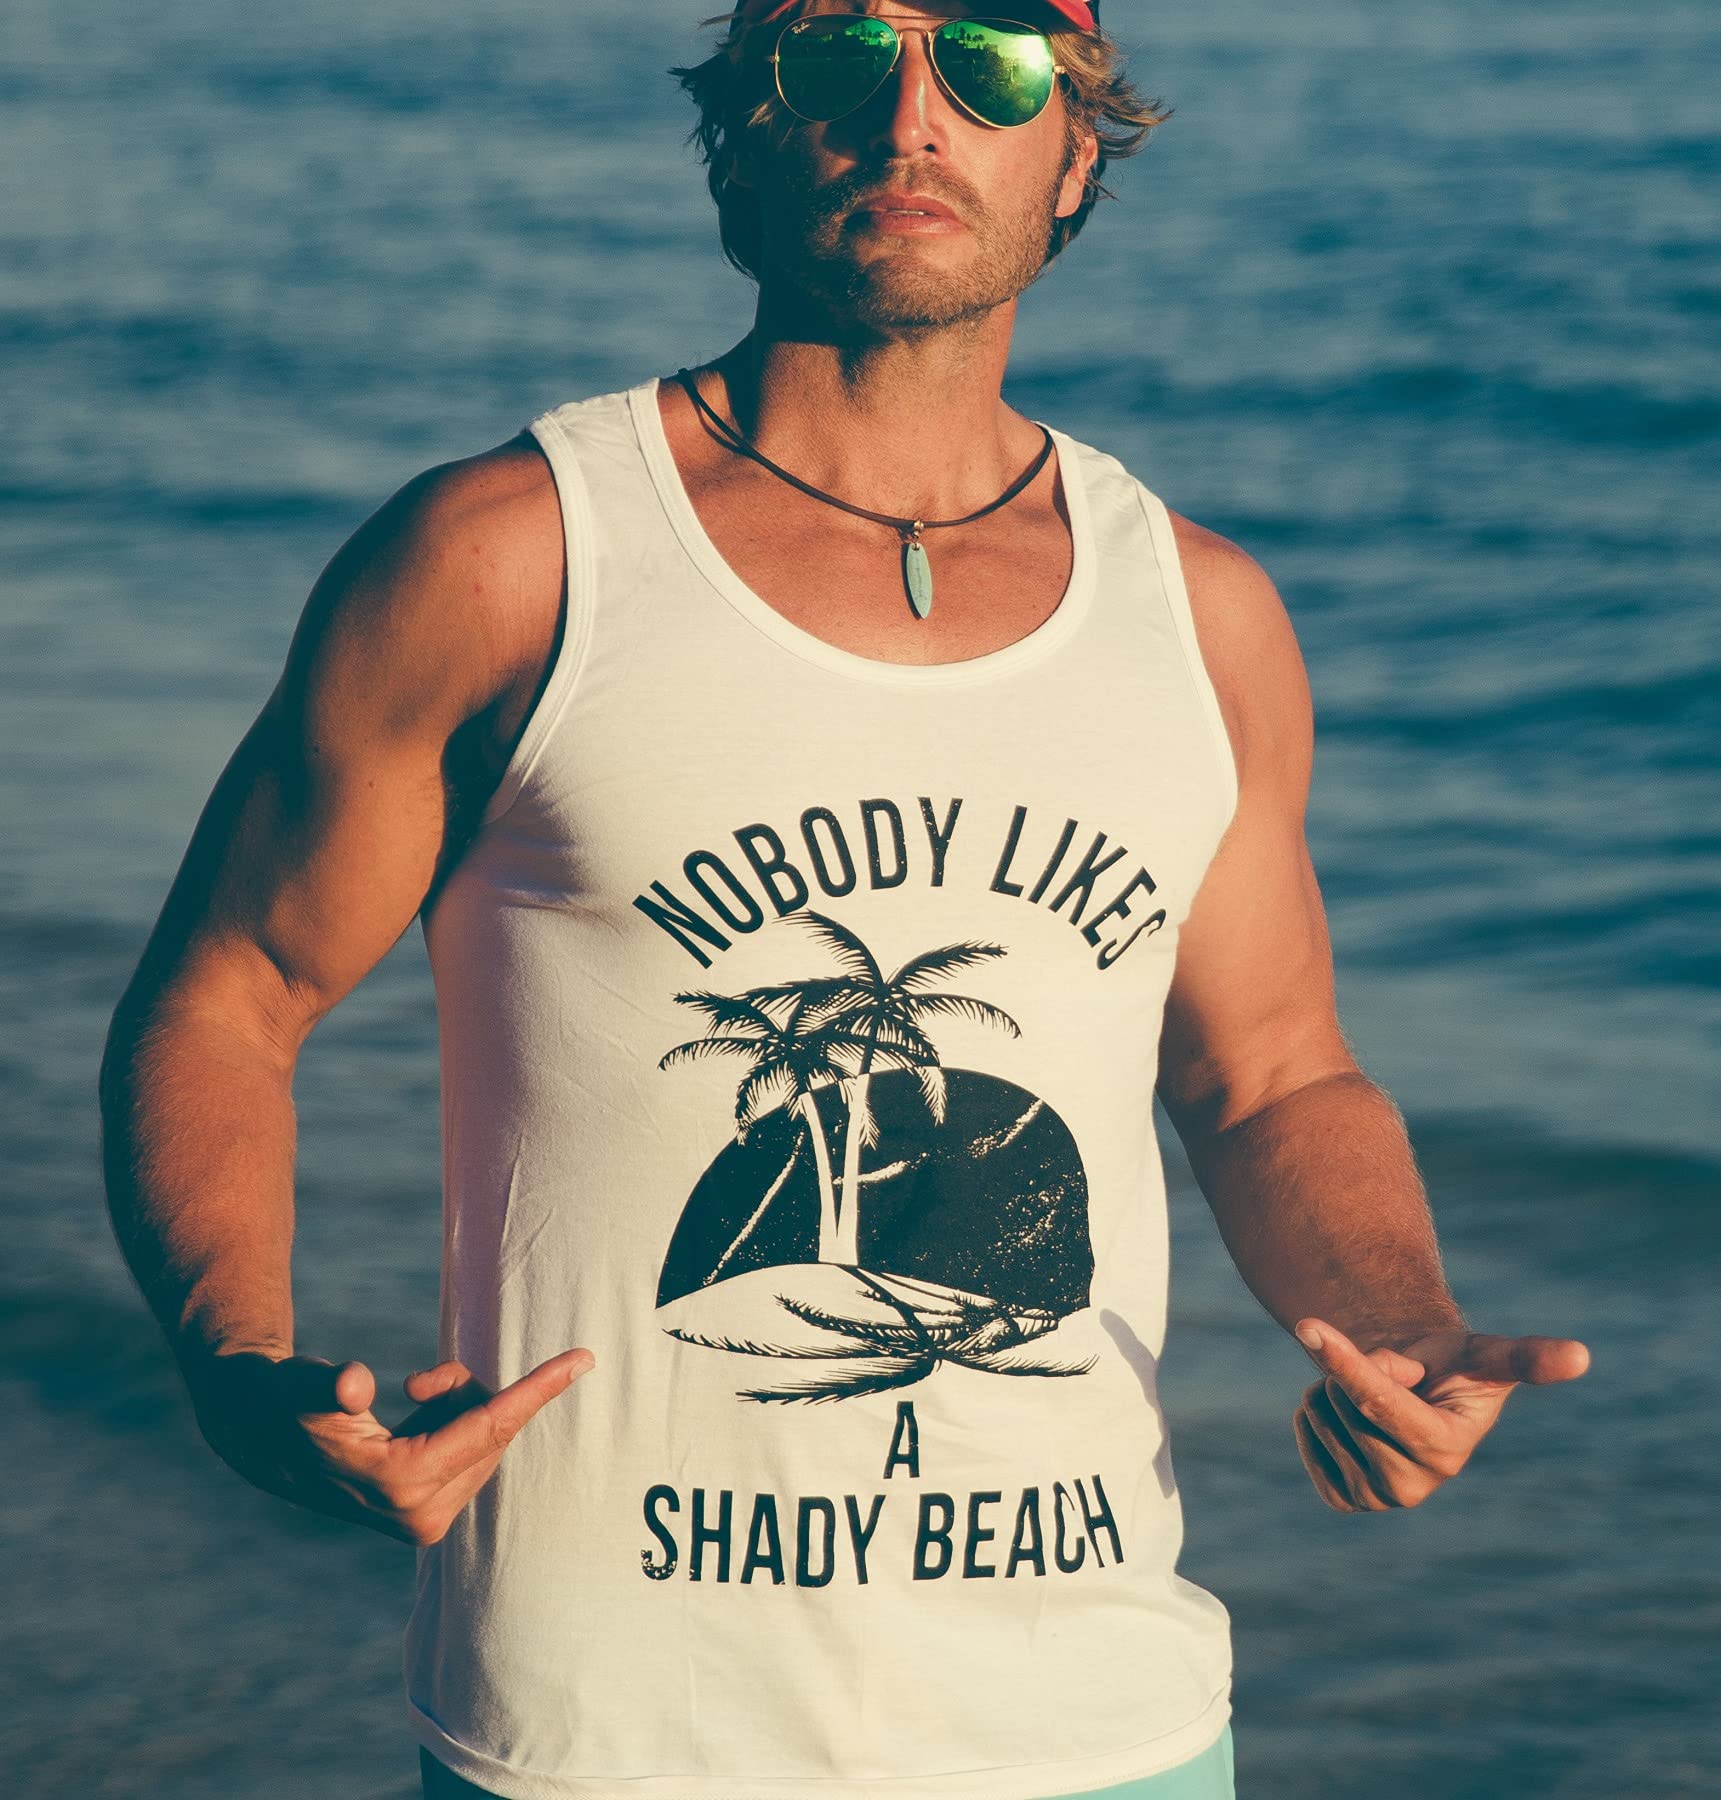 Crazy Dog T-Shirts Mens Shady Beach Funny Cool Tees Sleeveless Gym Workout Novelty Fitness Tanktop